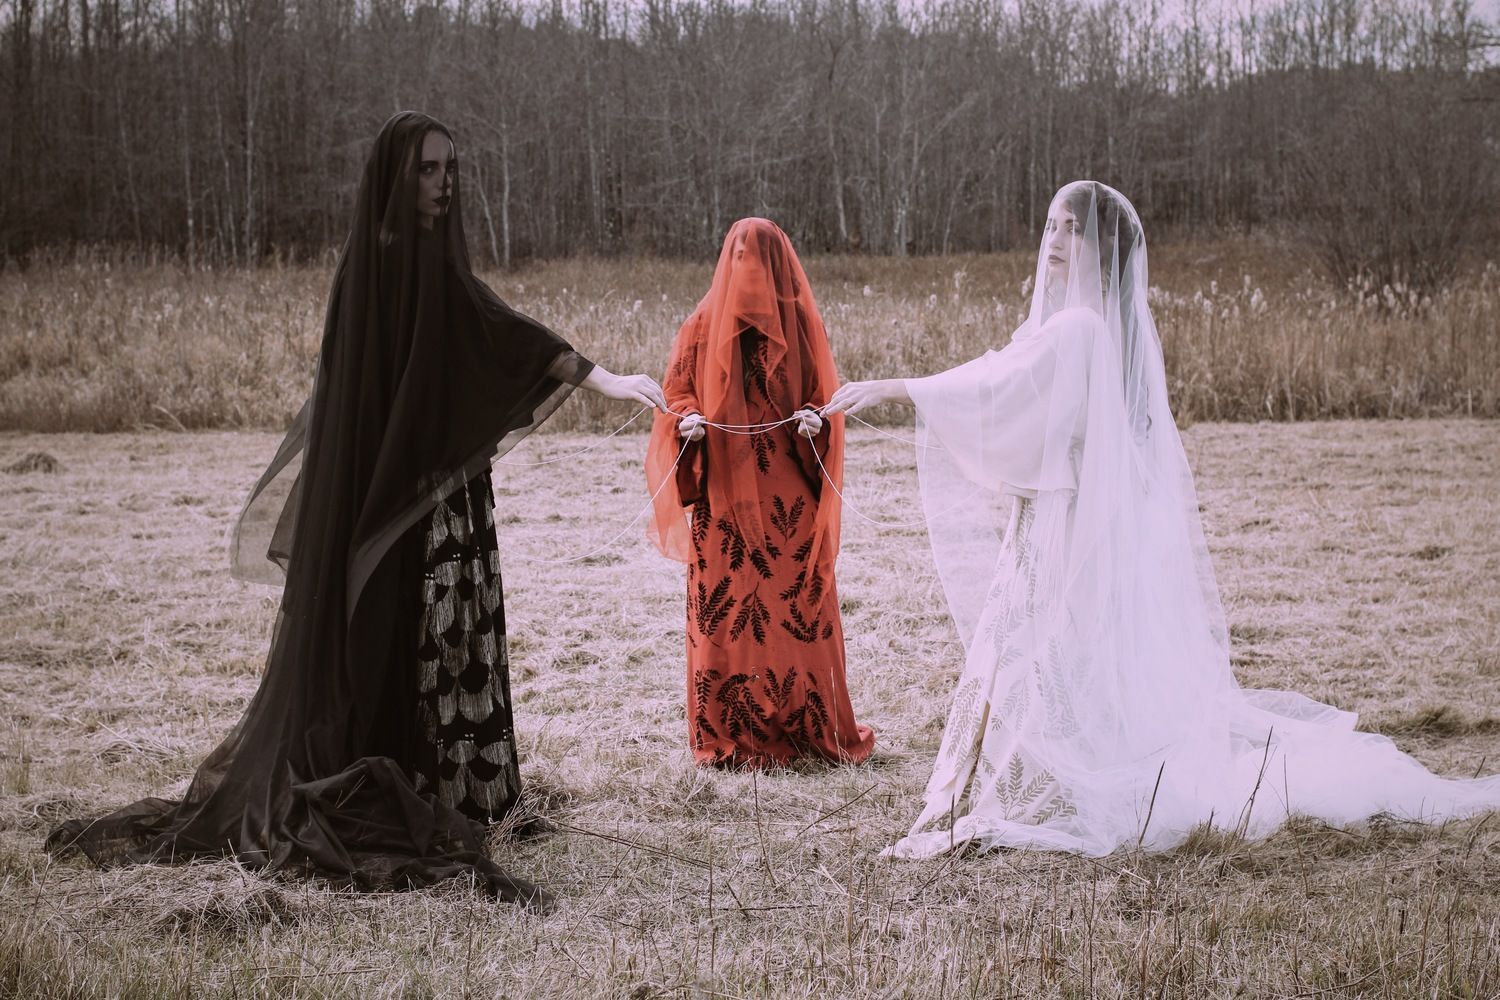 Three women in long dresses for ceremony are standing in a field holding hands.